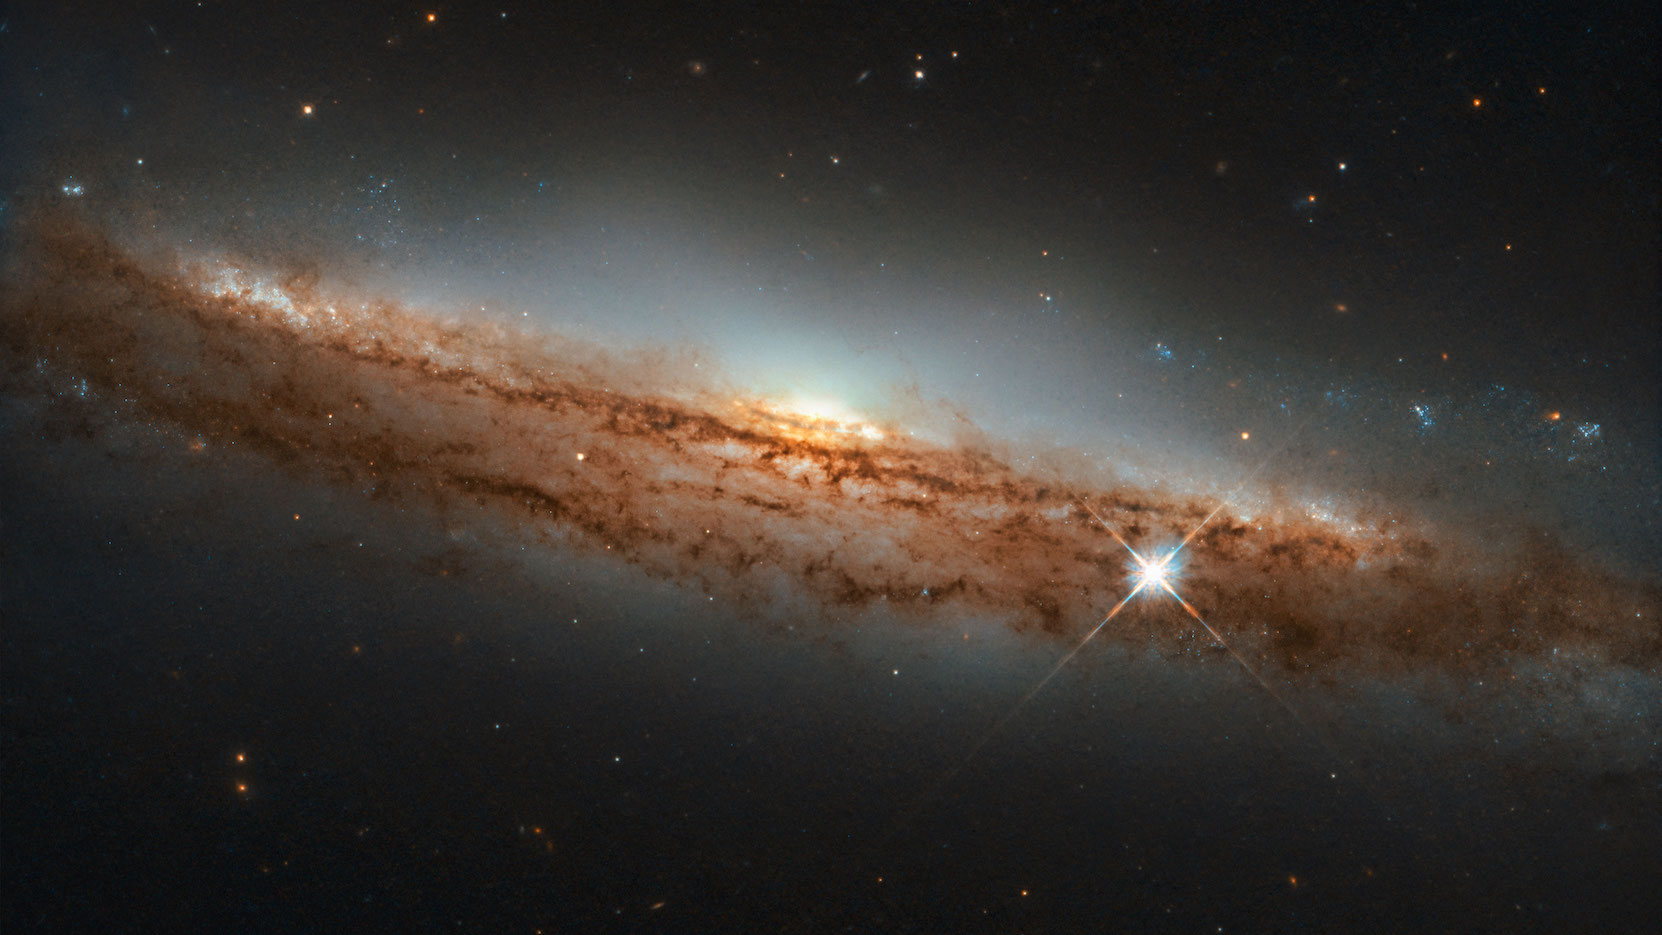 Hubble Space Telescope image of a spiral galaxy 